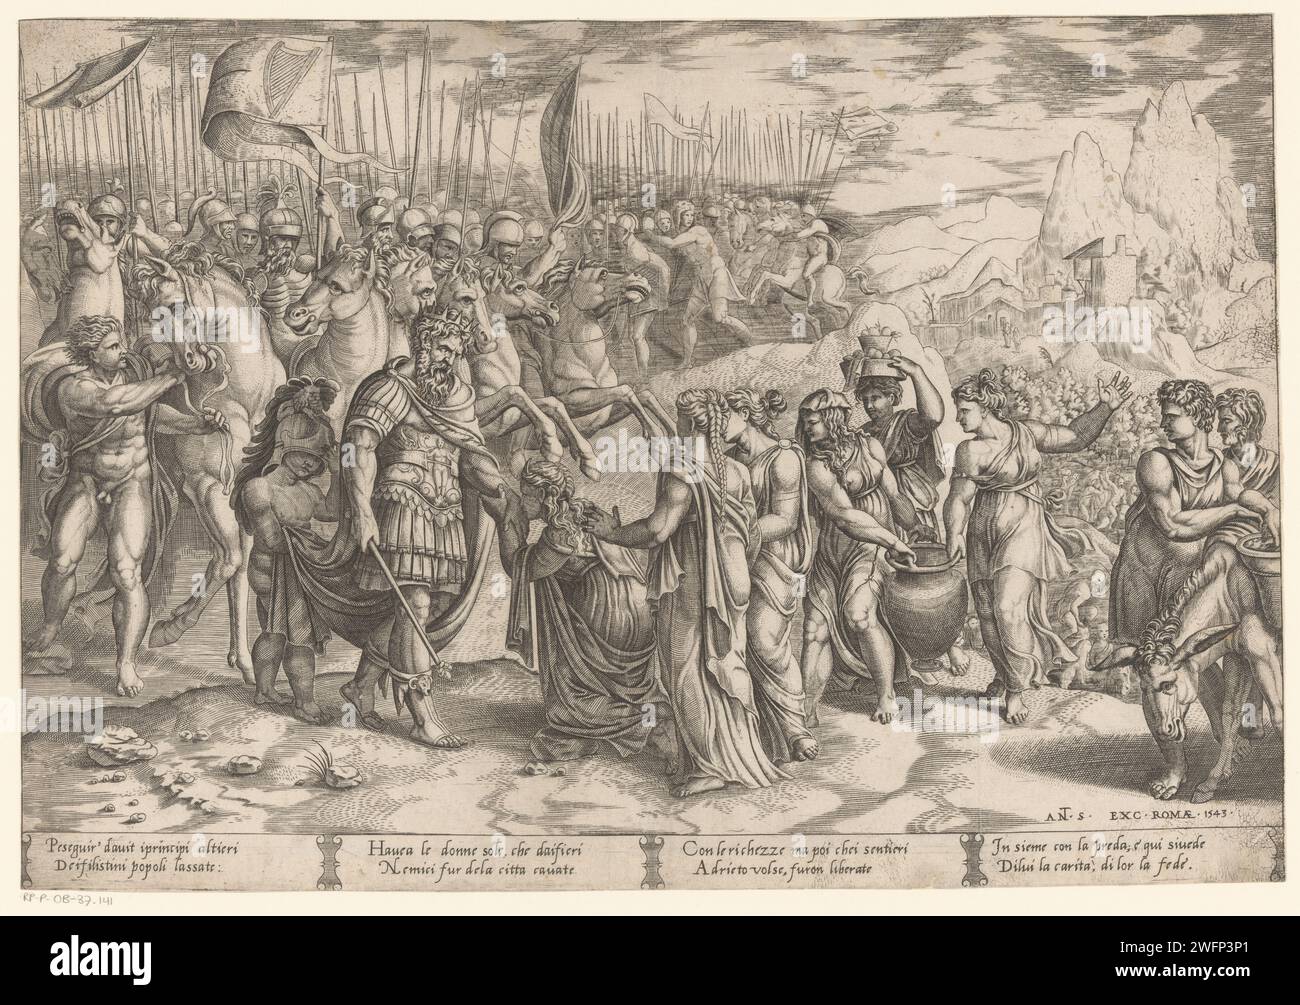 Het Aanbod Van Abigaïl, Anonymous, Antonio Salamanca, After Baccio Bandinelli, After Giulio Romano, 1543 print Abigaïl kneels for King David and his army. Abigaïl and her service stomachs bring the men's drinks and food. Fresh in four columns in Latin in STUPMEP. print maker: Italyafter design by: Italyafter design by: Italypublisher: Rome paper engraving meeting of David and Abigail, who kneels before him Stock Photo